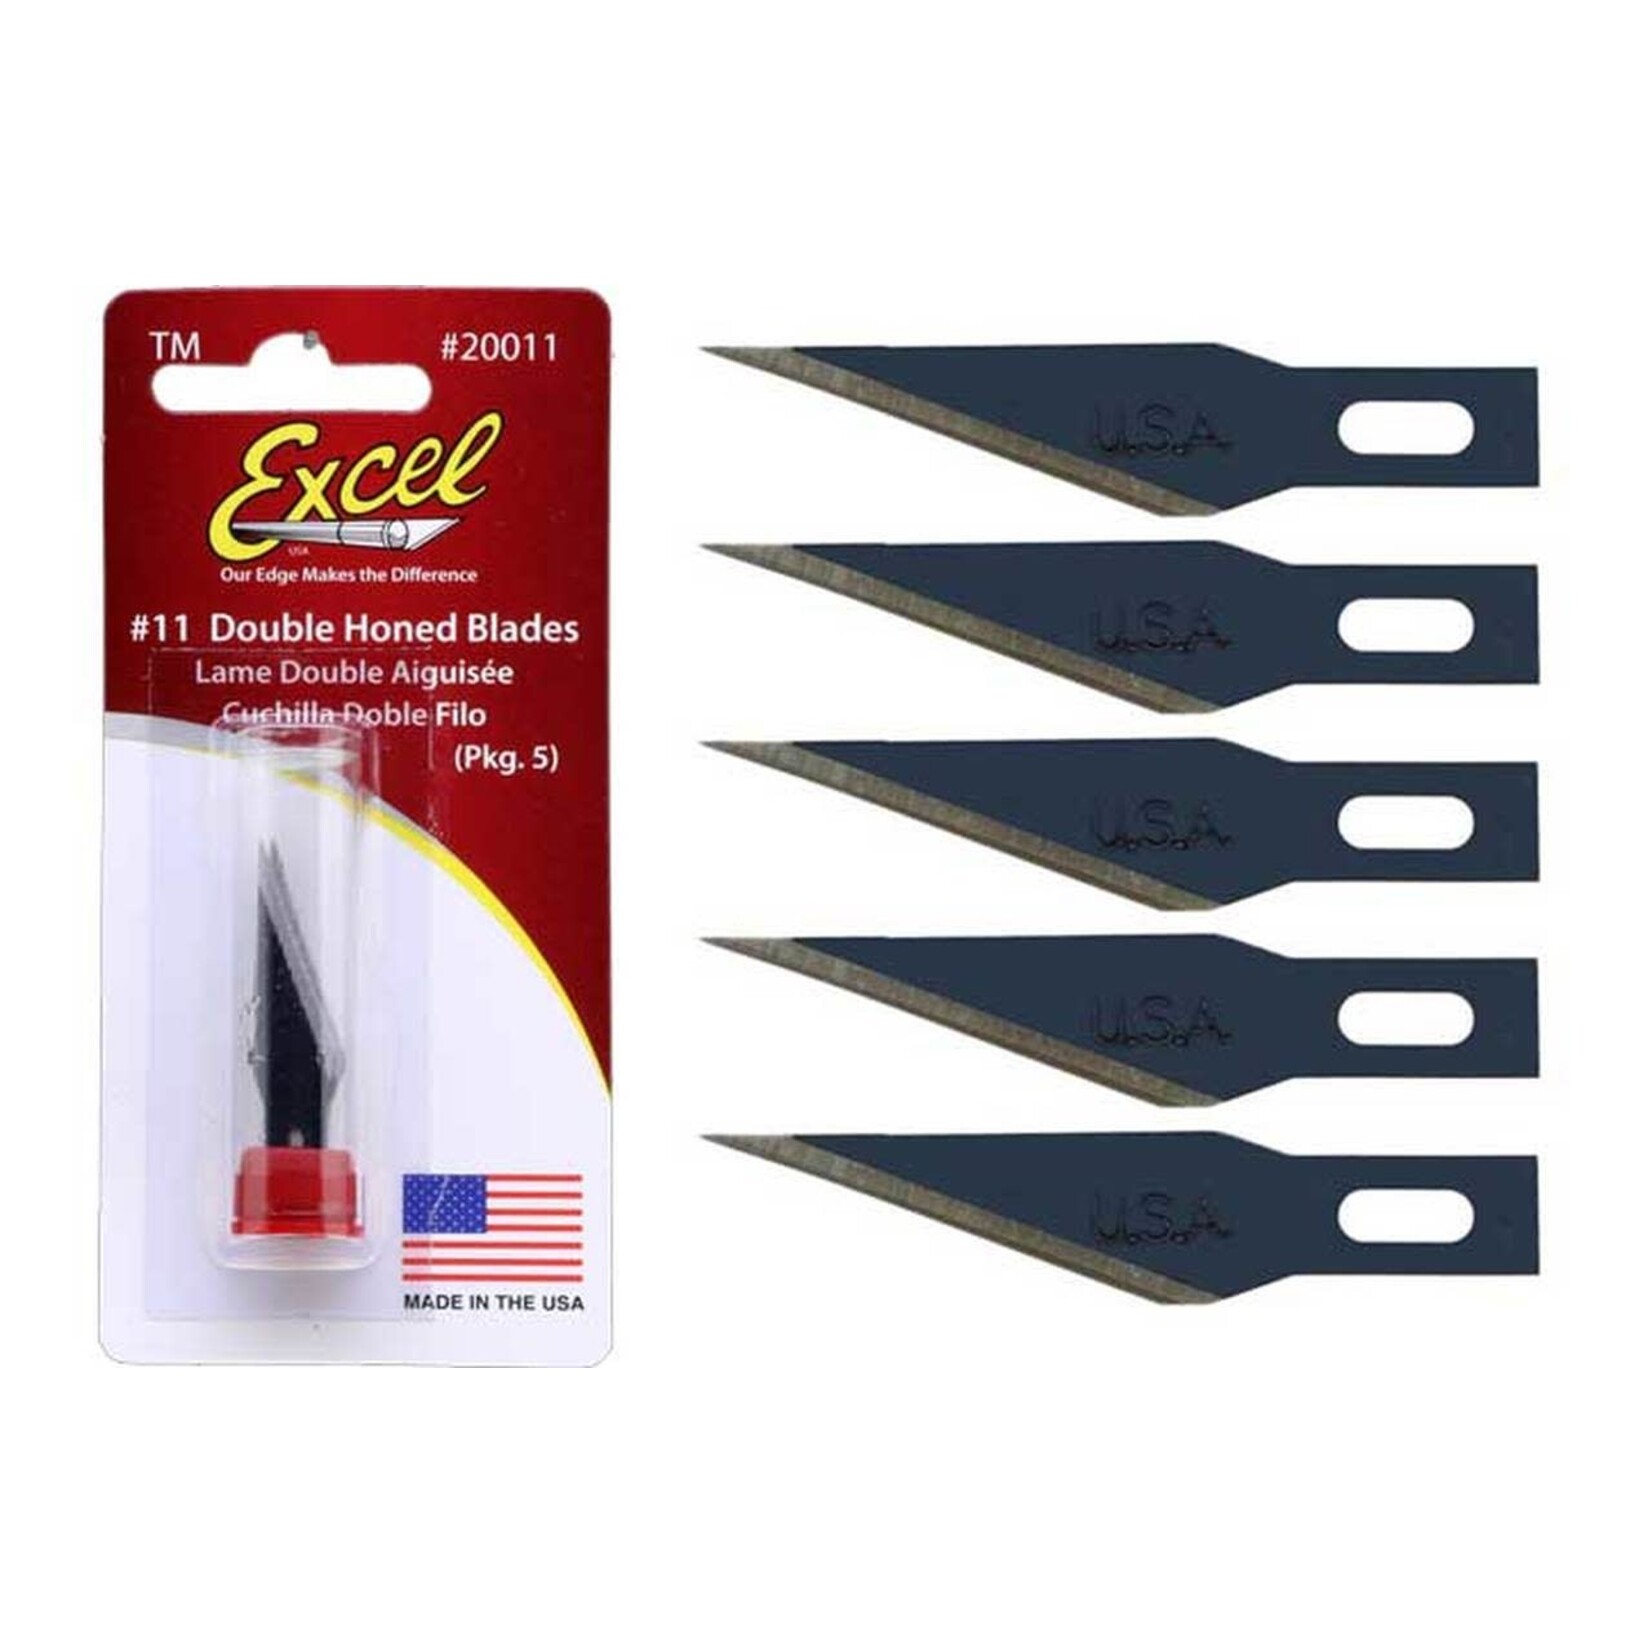 Excel Honed Blade #11 Double - 5 Pcs.